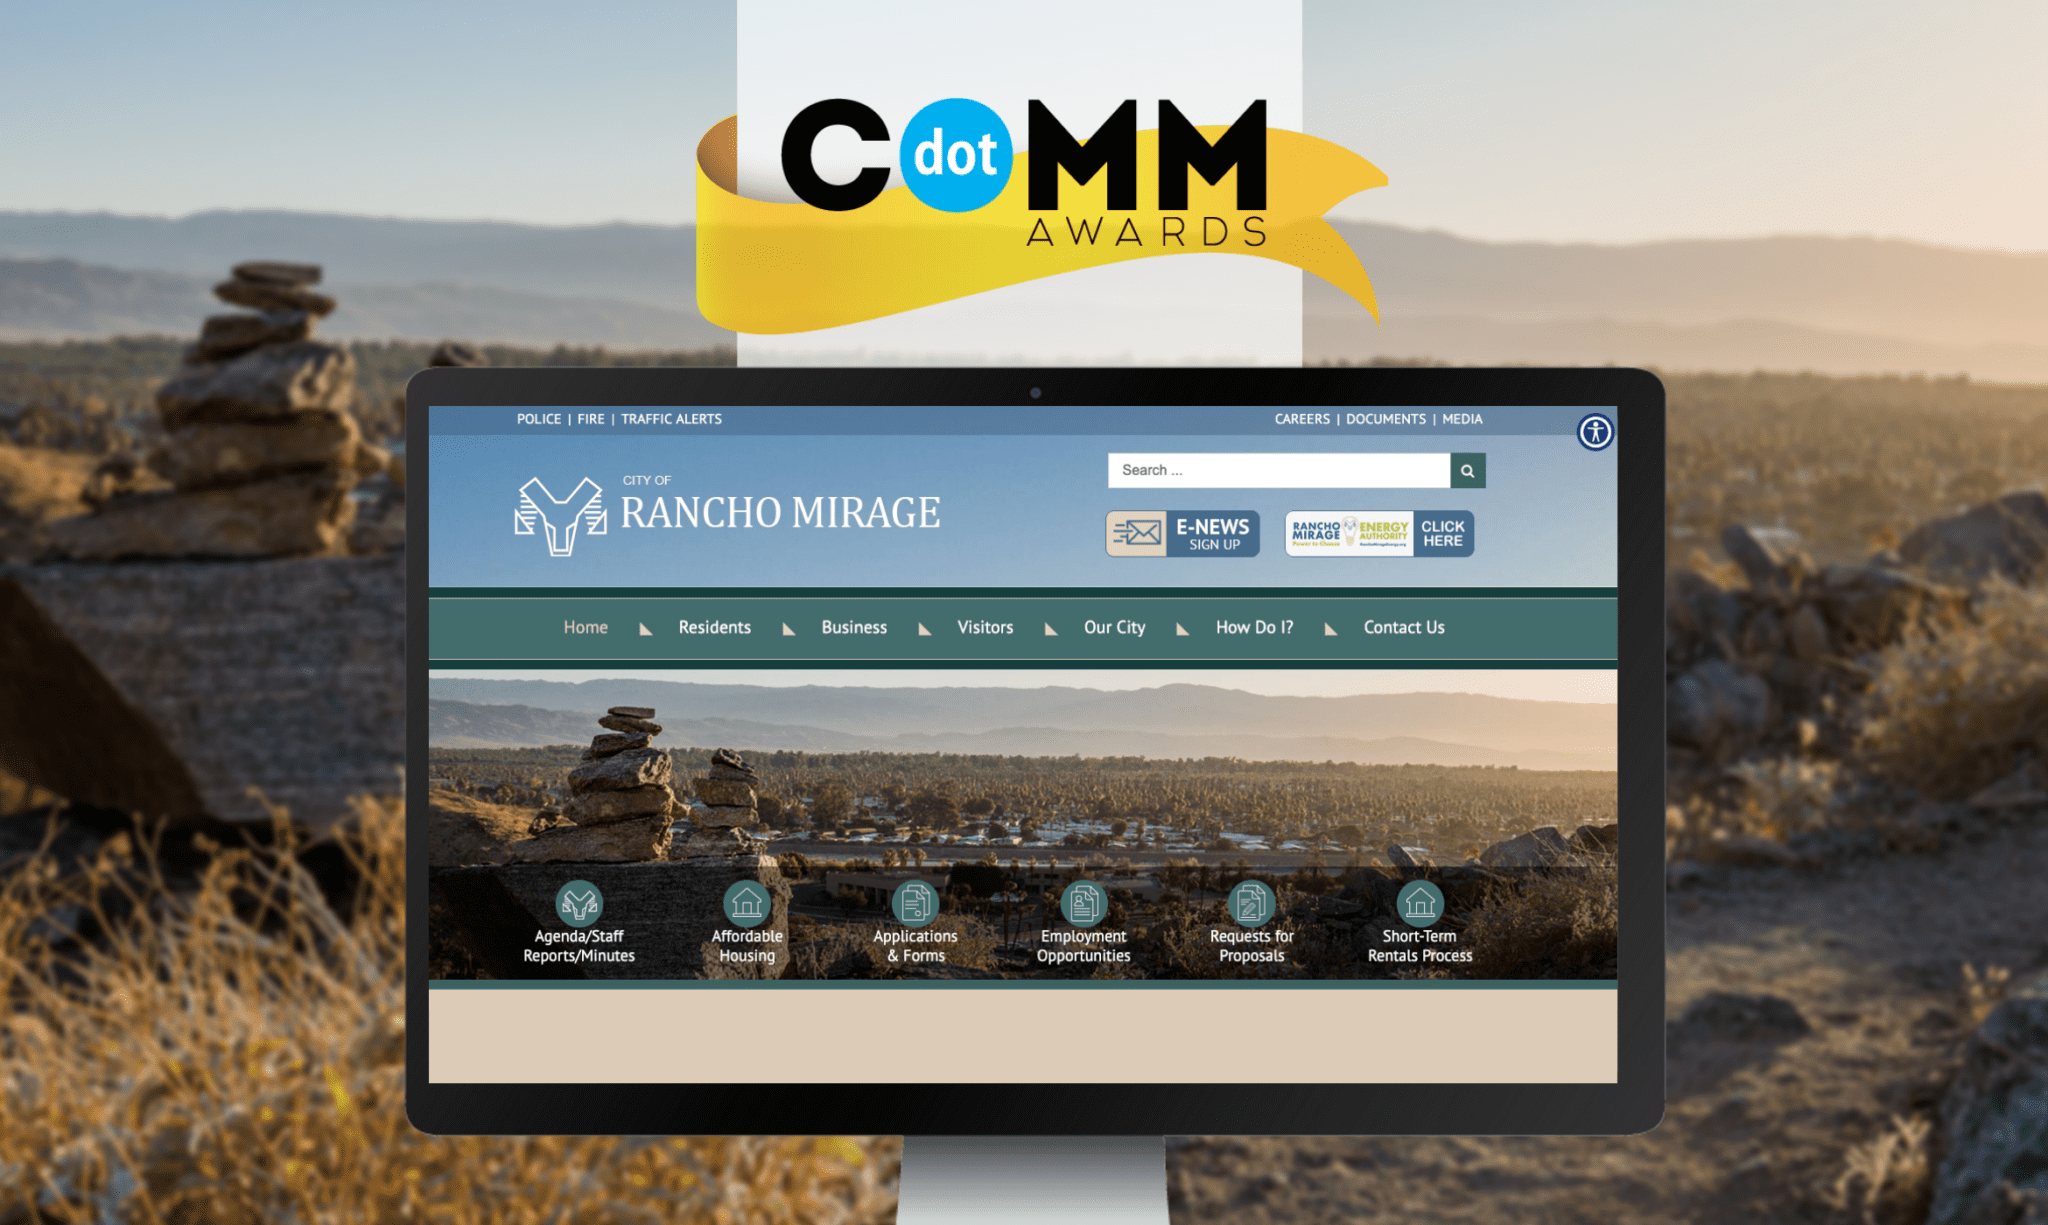 T.e. Digital Receives Honorable Mention Dotcomm Award For City Of Rancho Mirage Website